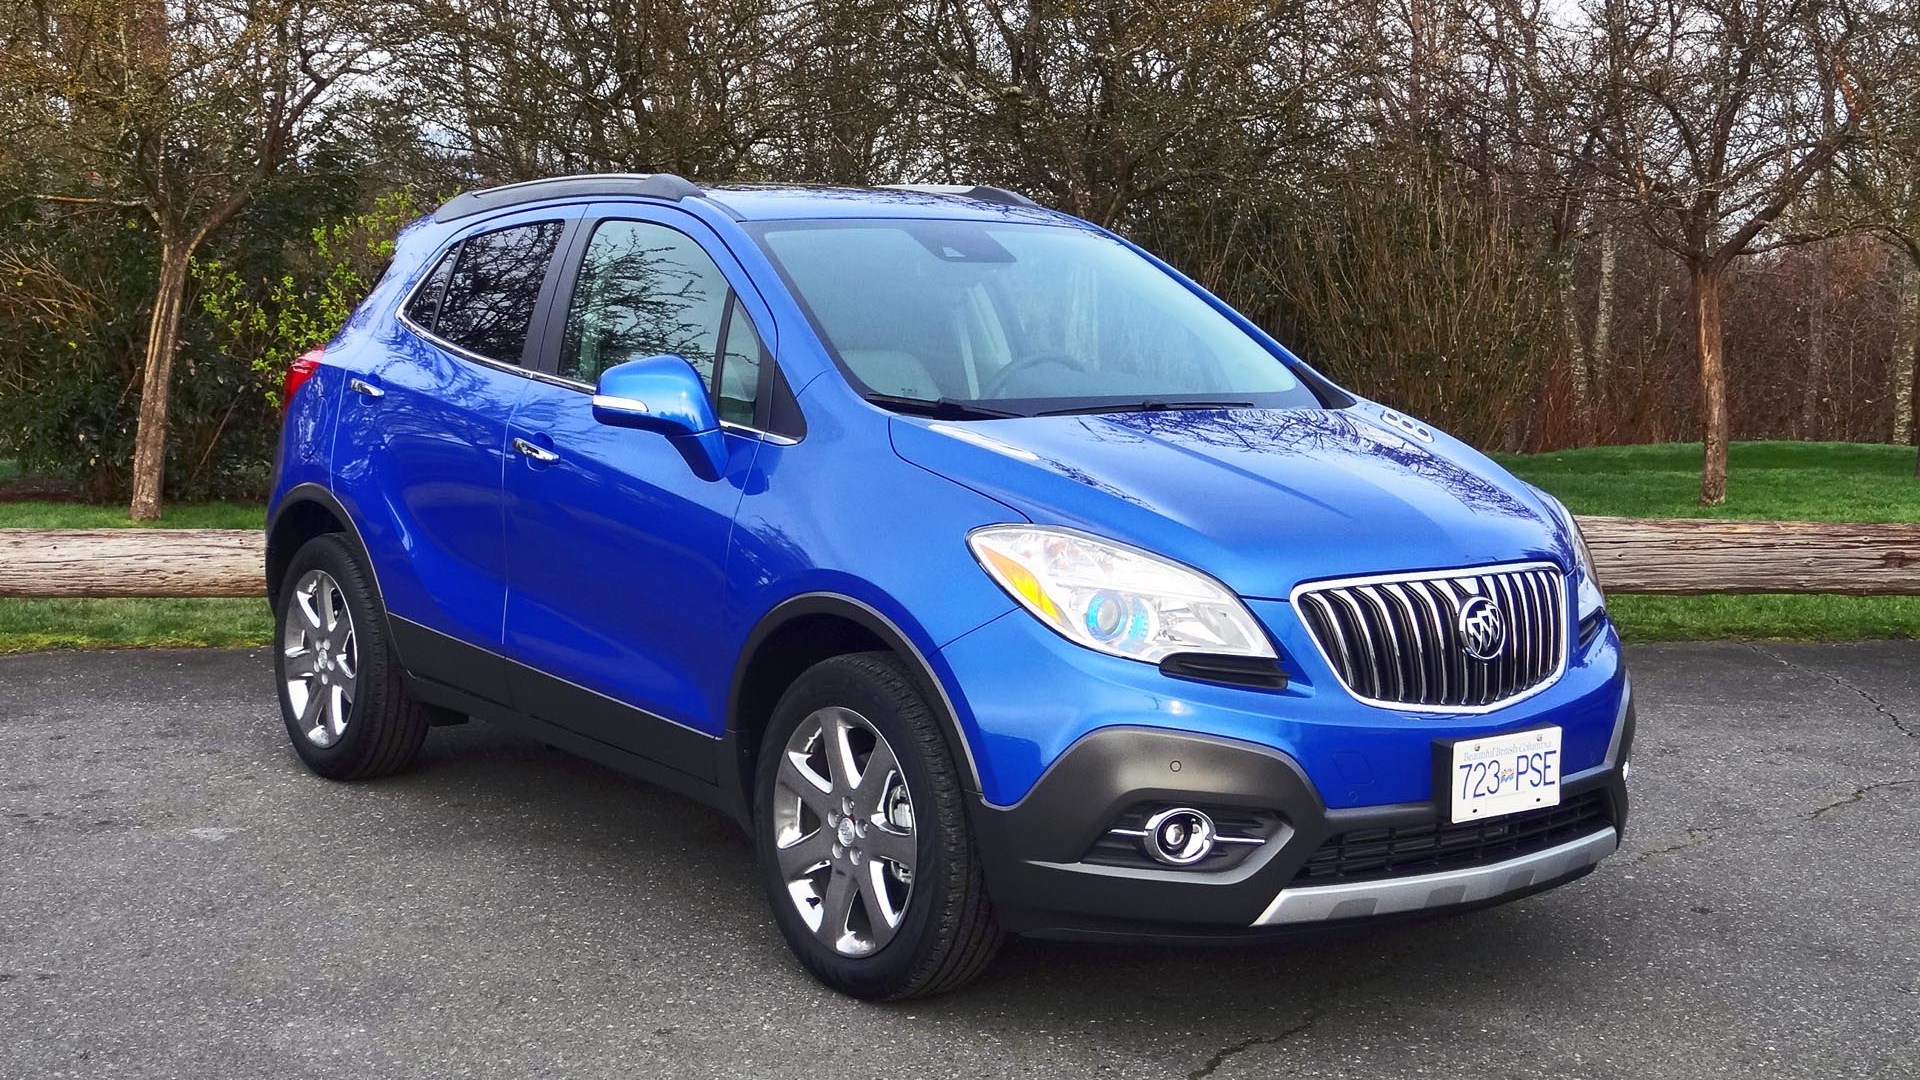 2015 Buick Encore AWD Test Drive Review | AutoTrader.ca